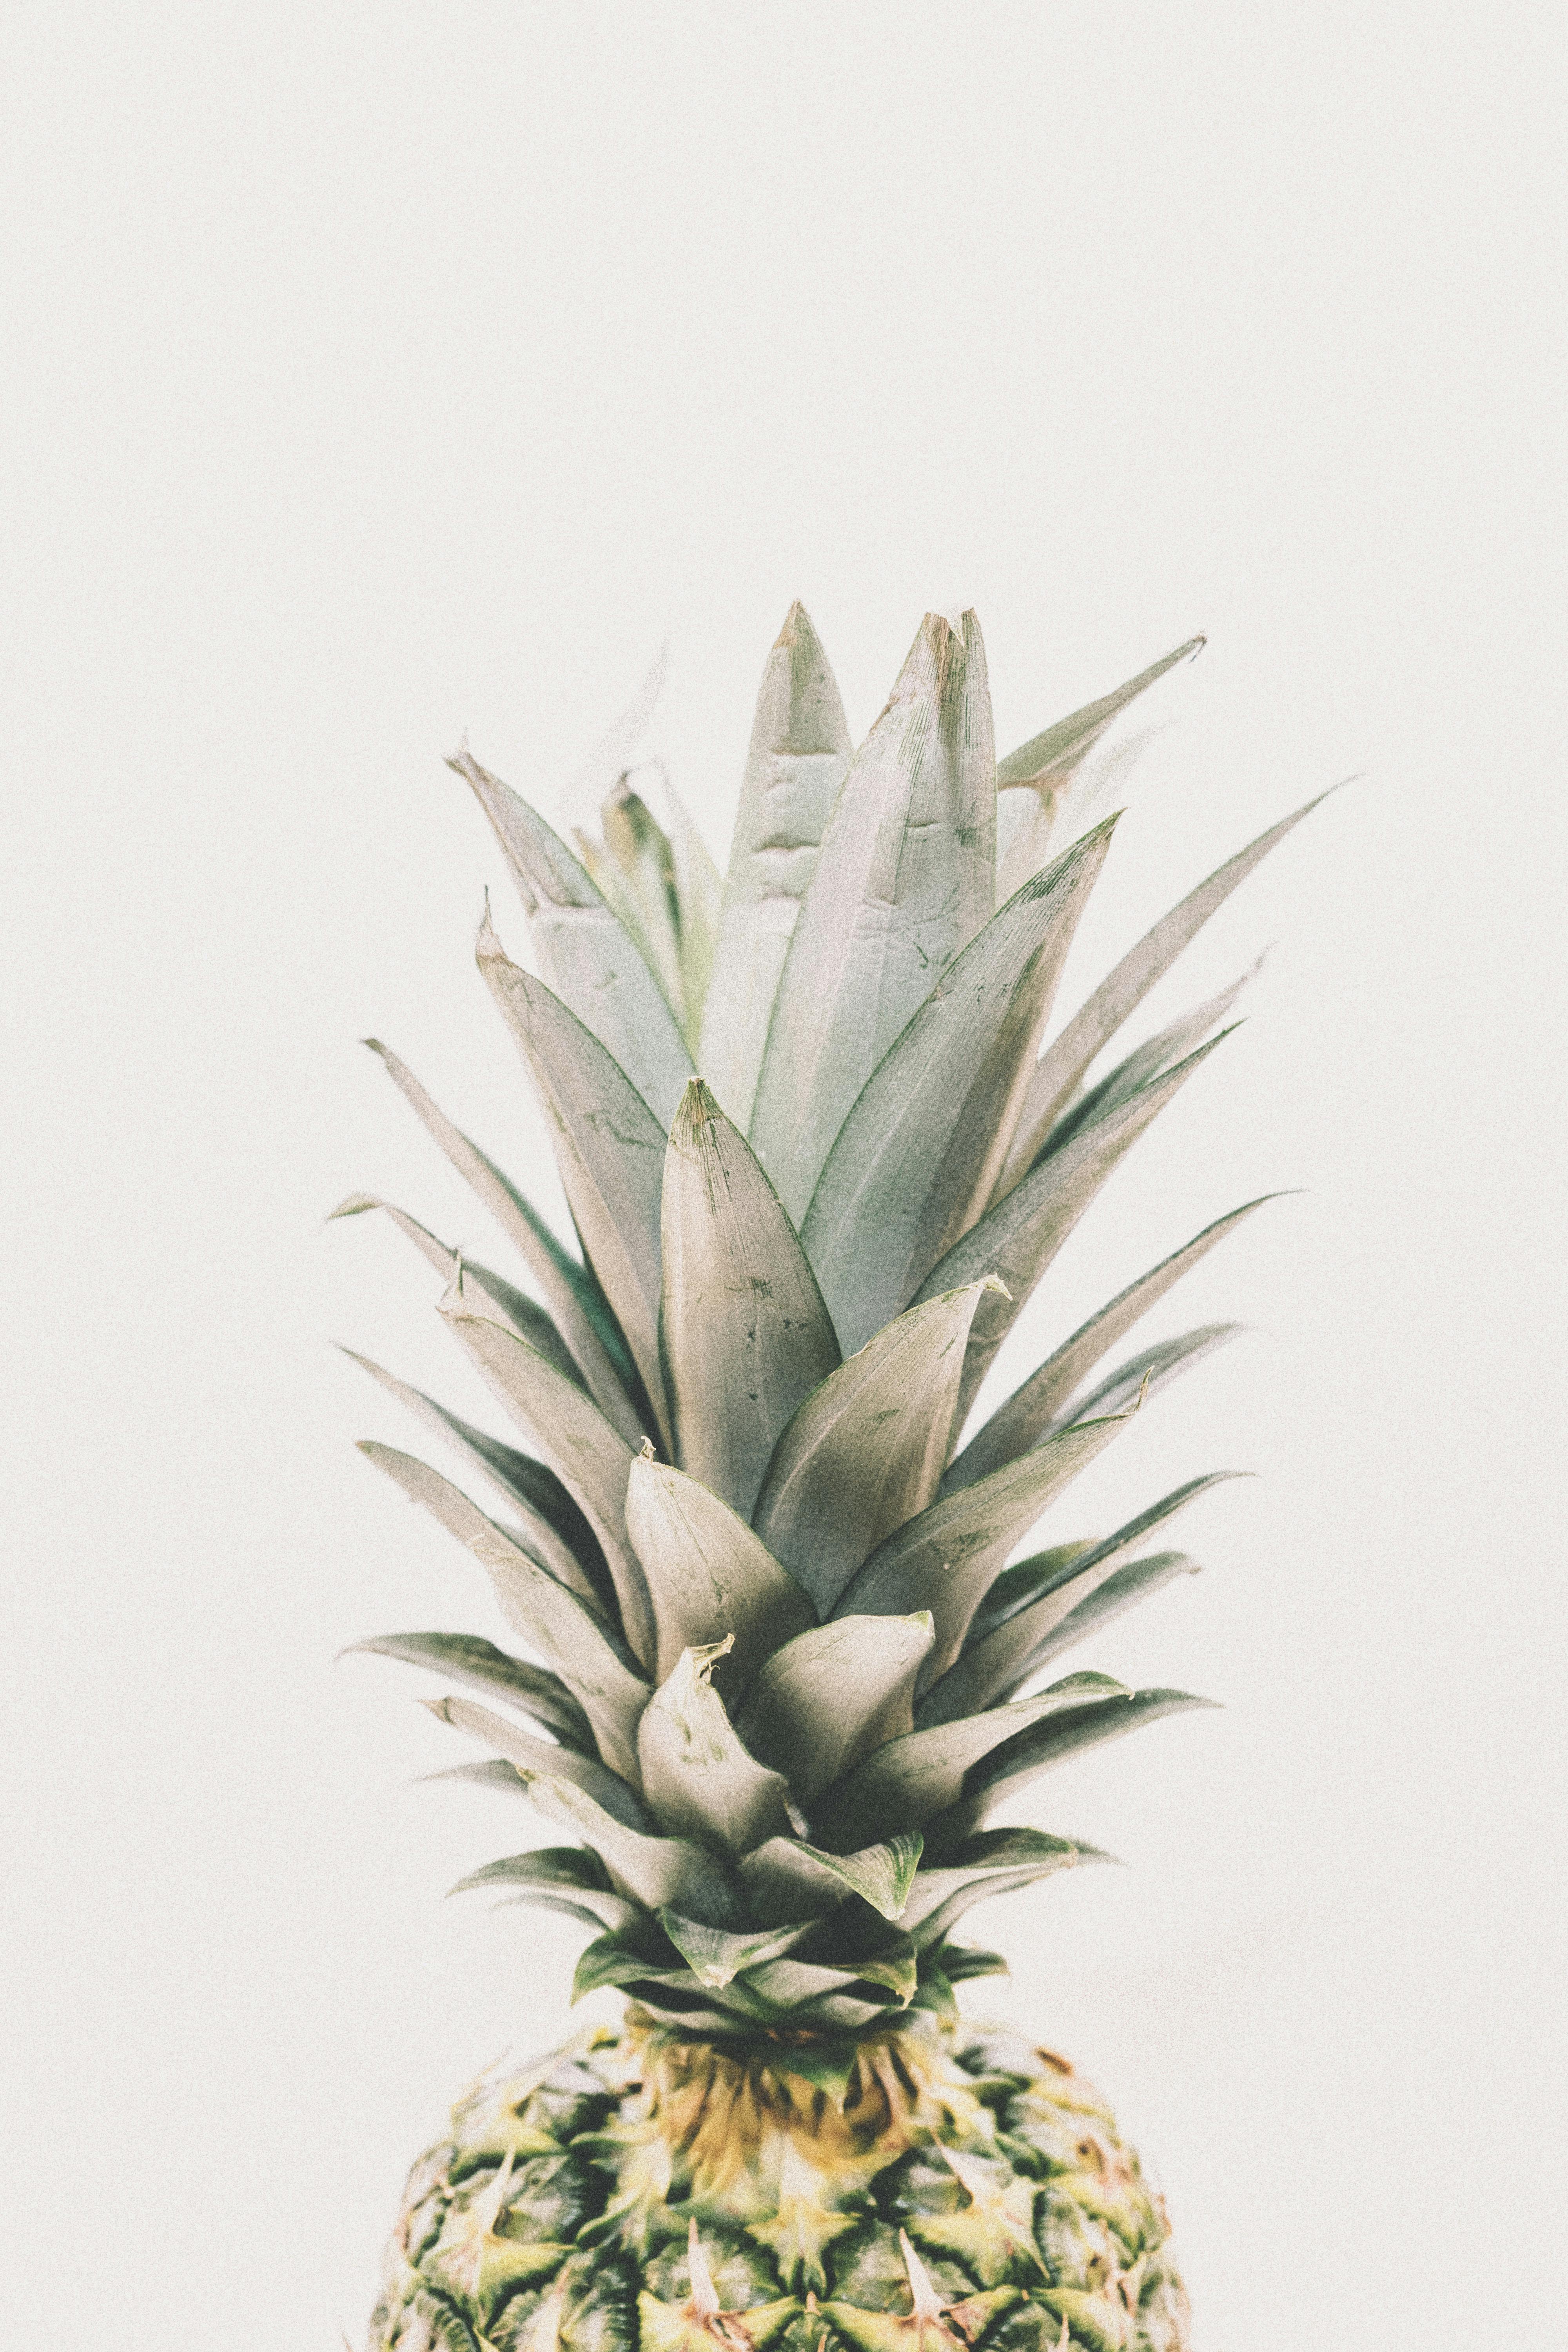 Pineapple Background Images HD Pictures and Wallpaper For Free Download   Pngtree